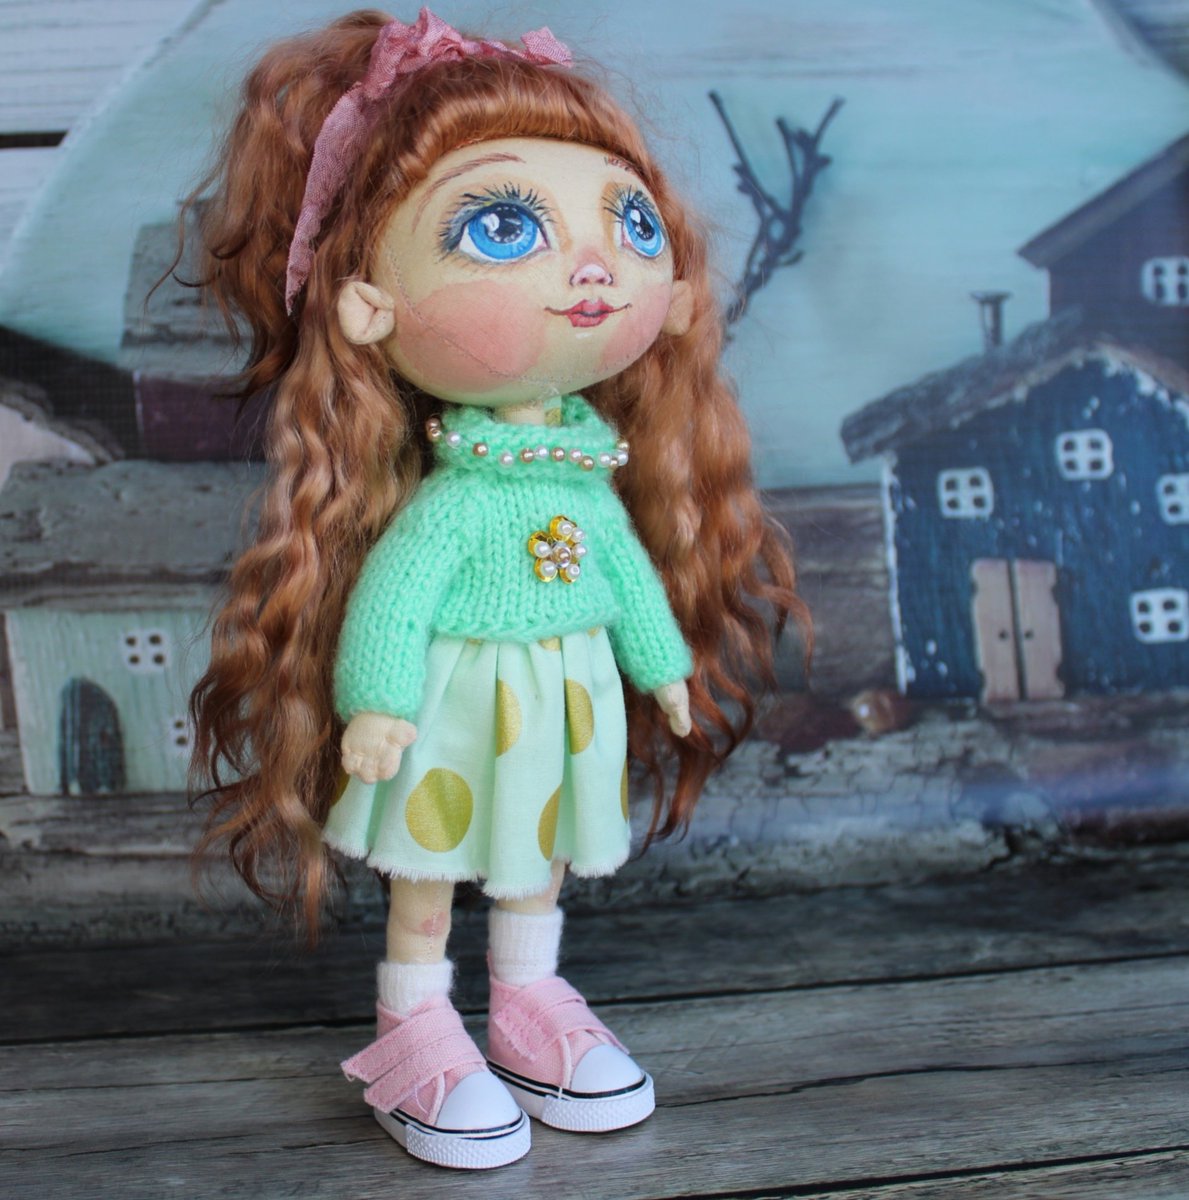 'The doll girl is so positive and sweet.\nI sewed it from fabric and put my soul and heart into it.\nIf you decide to buy her, then she chose you herself!\nThe doll will become a cute companion for a girl of any age.' etsy.me/3sOUswV #ragdoll #textiledoll #dollforgift